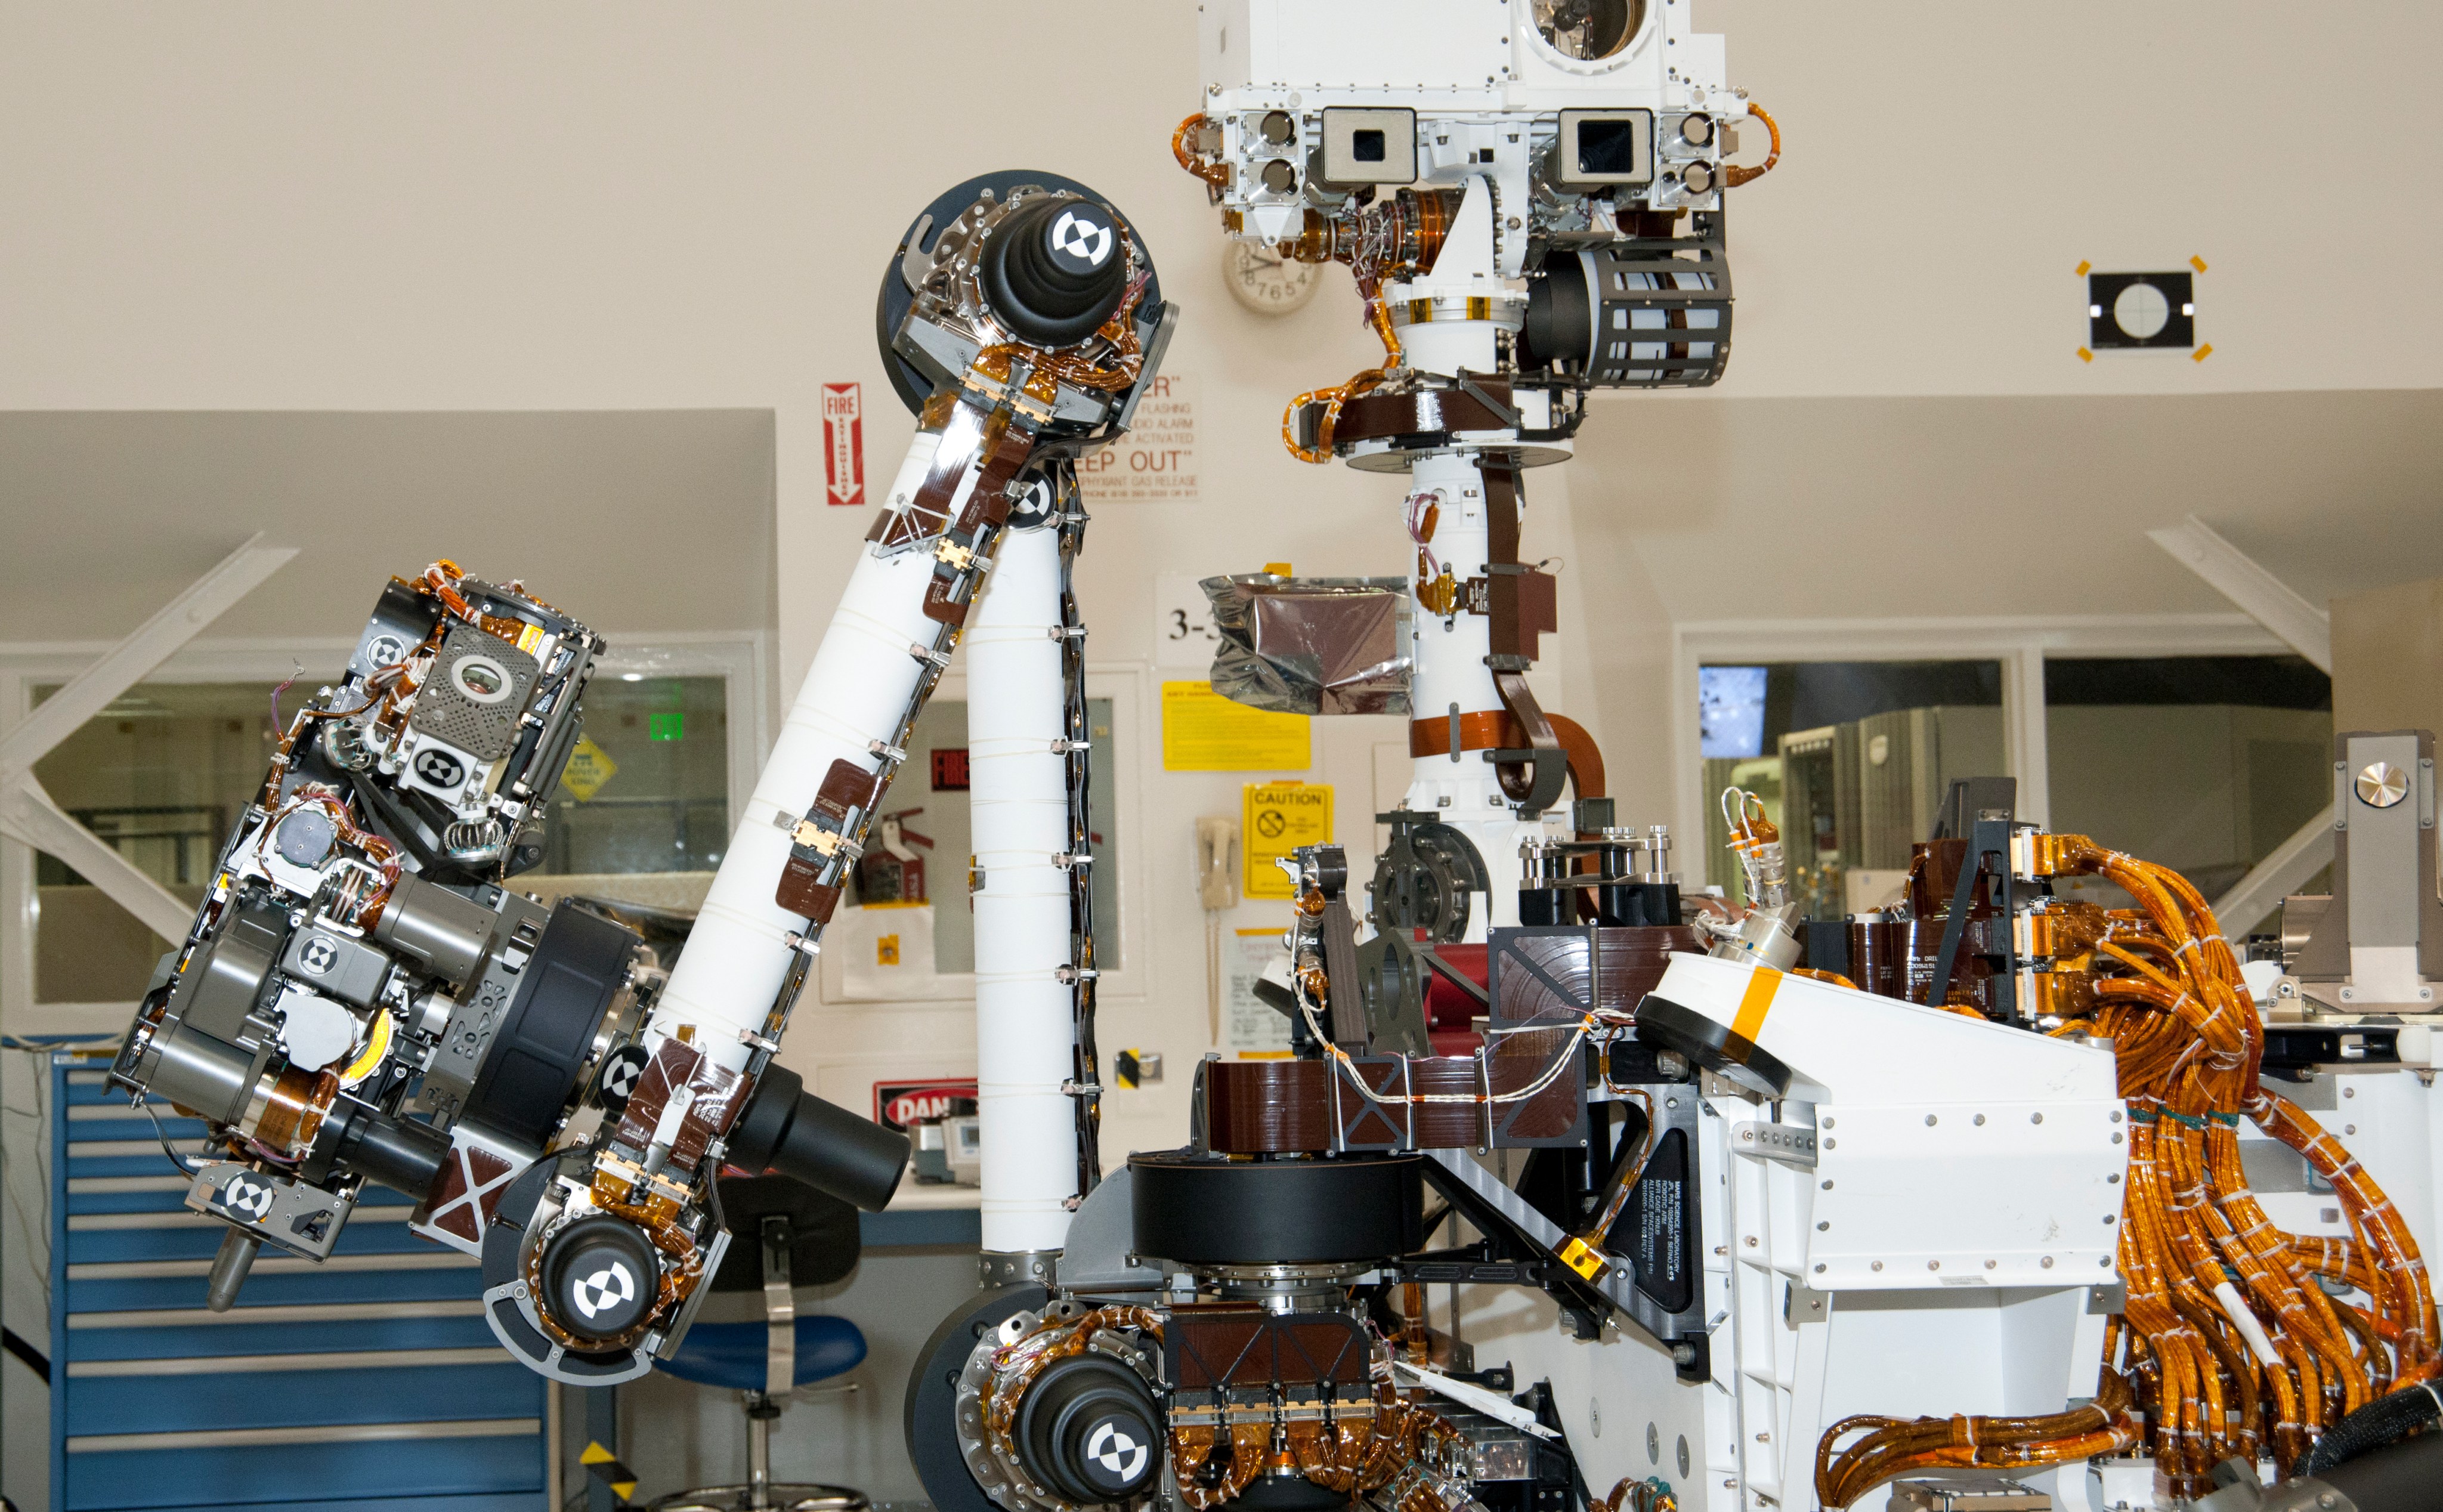 The arm and the remote sensing mast of the Mars rover Curiosity each carry science instruments and other tools for NASA's Mars Science Laboratory mission.